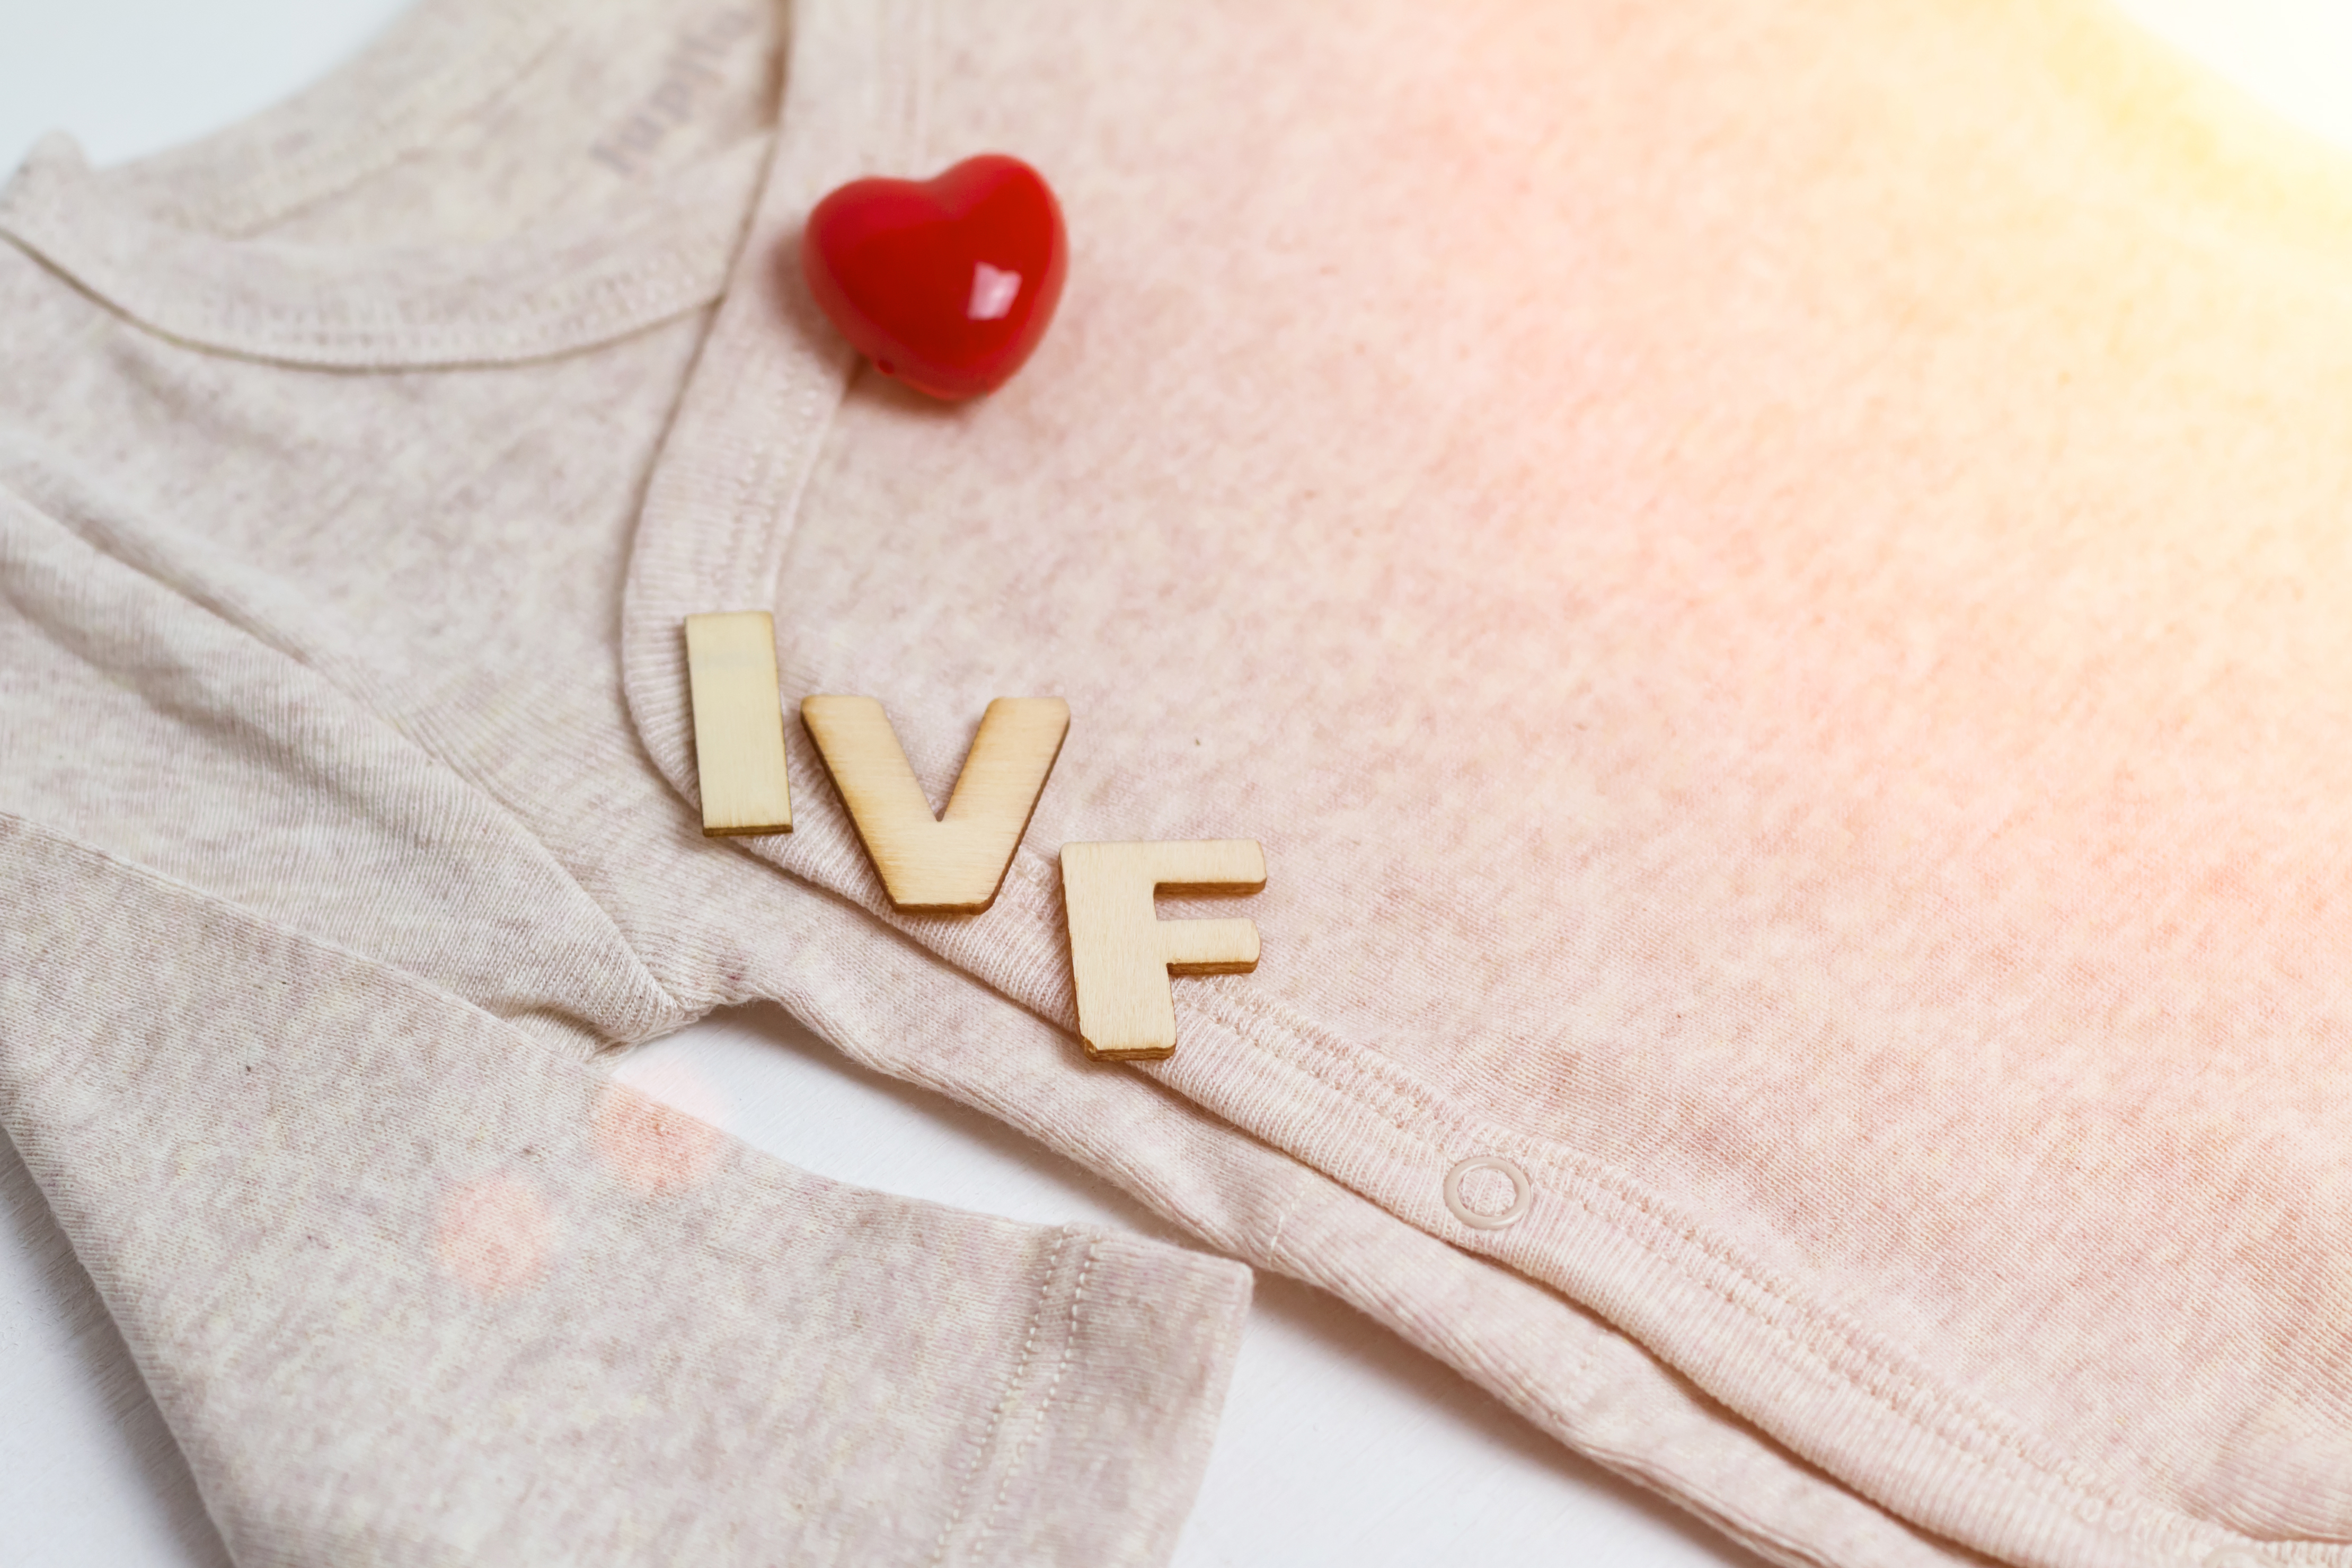 Baby grow with IVF letters and a red heart